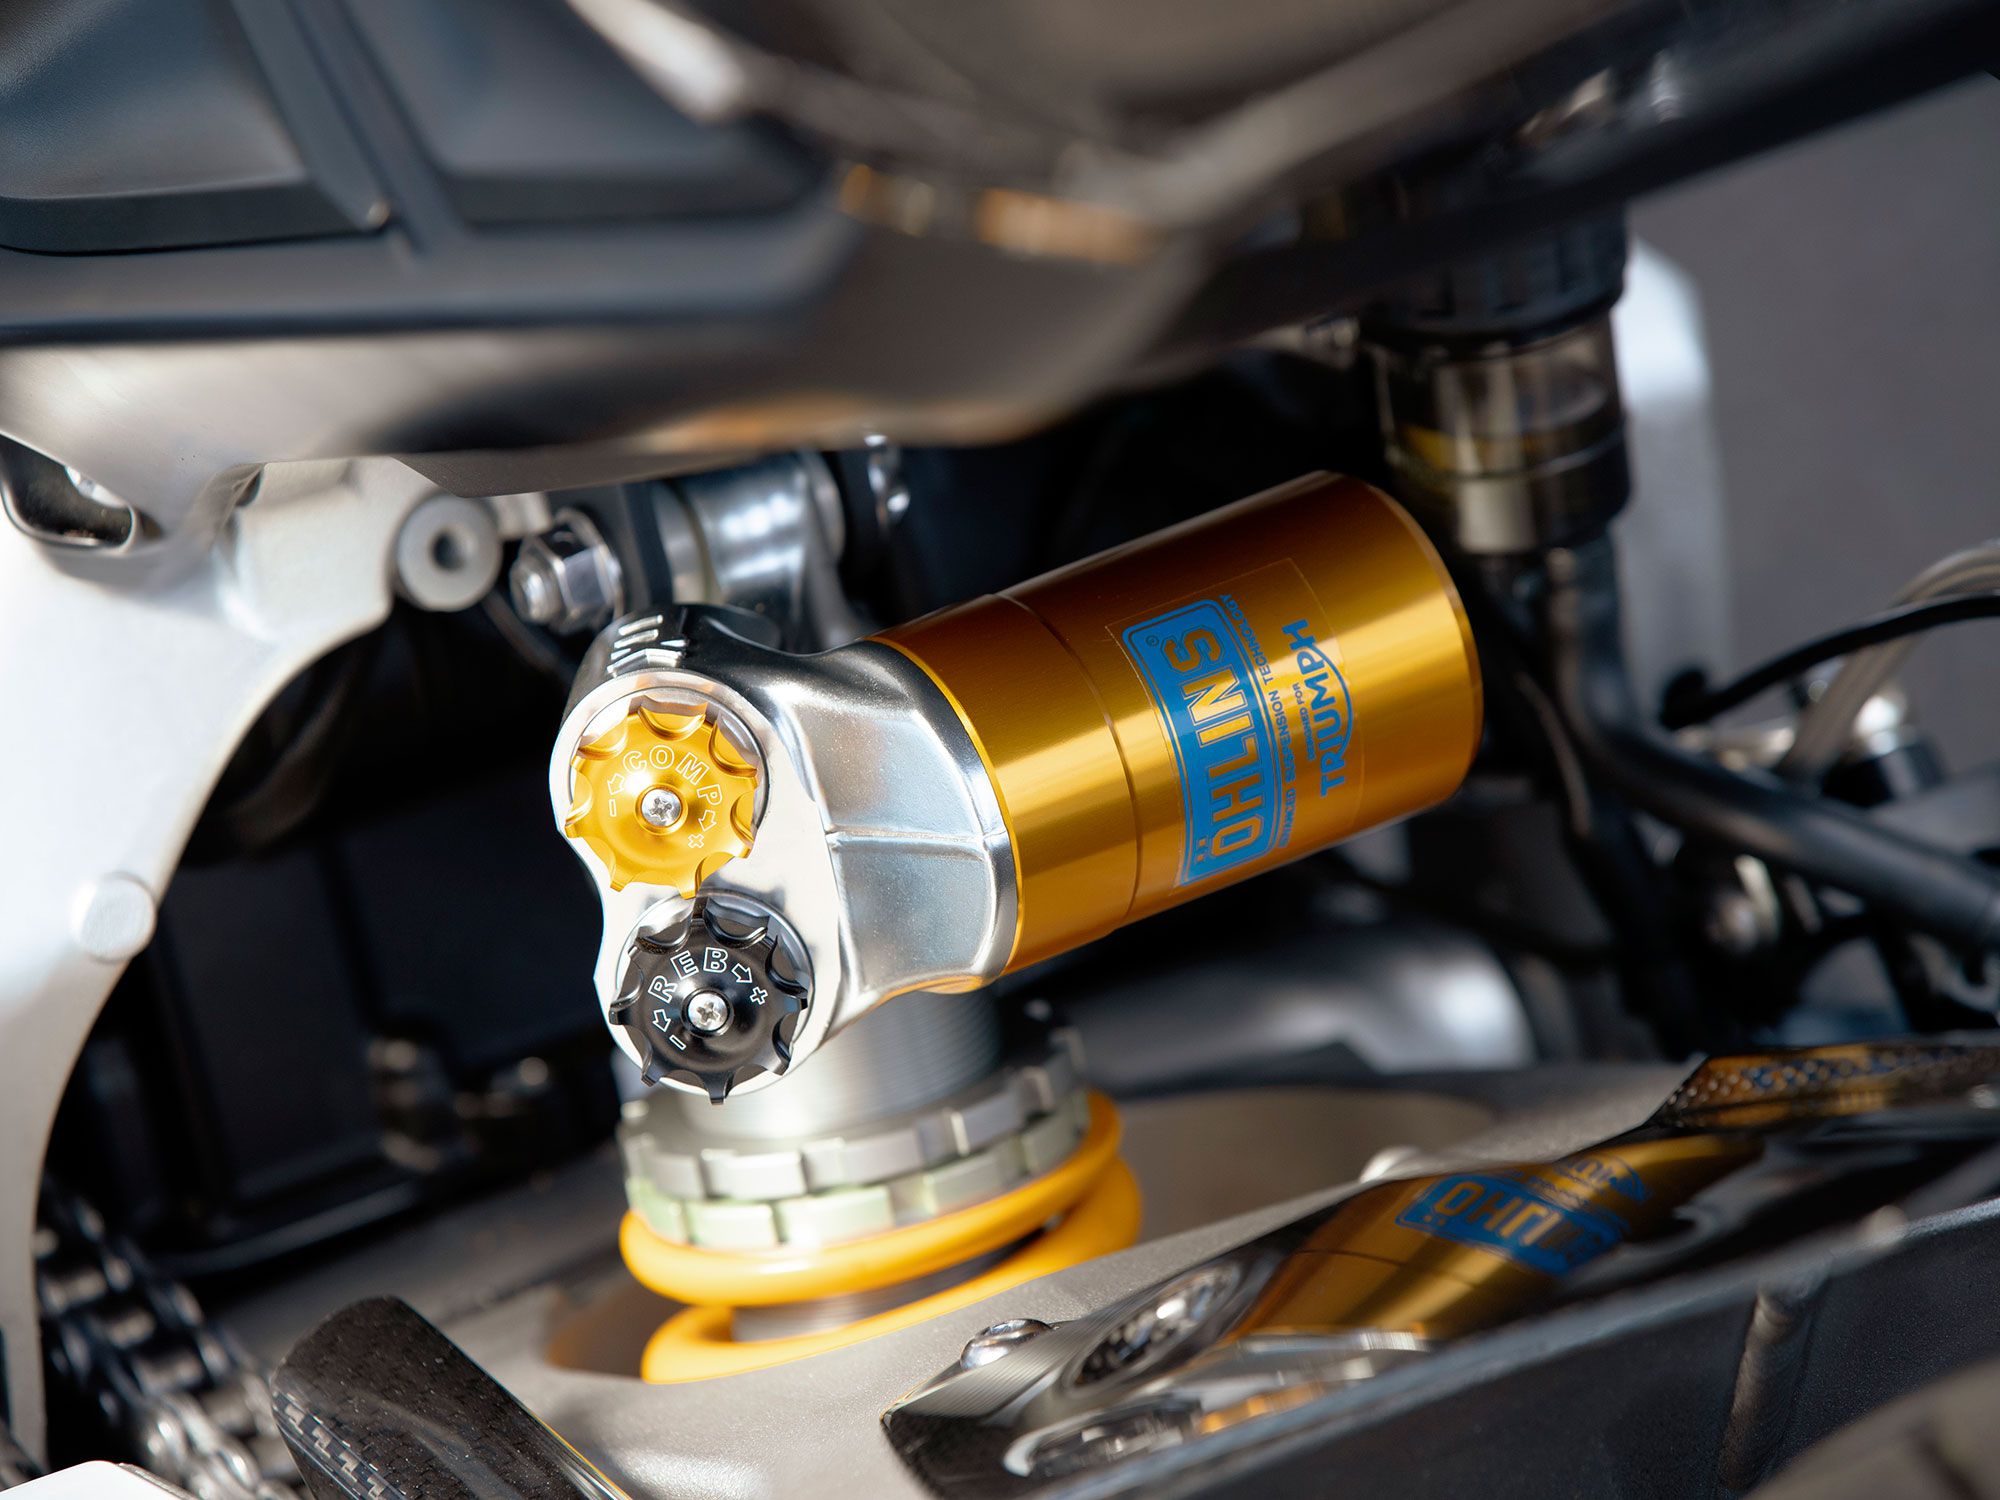 Advanced track day riders will appreciate the fully independent damping adjustment function of the Ohlins TTX-generation shock.